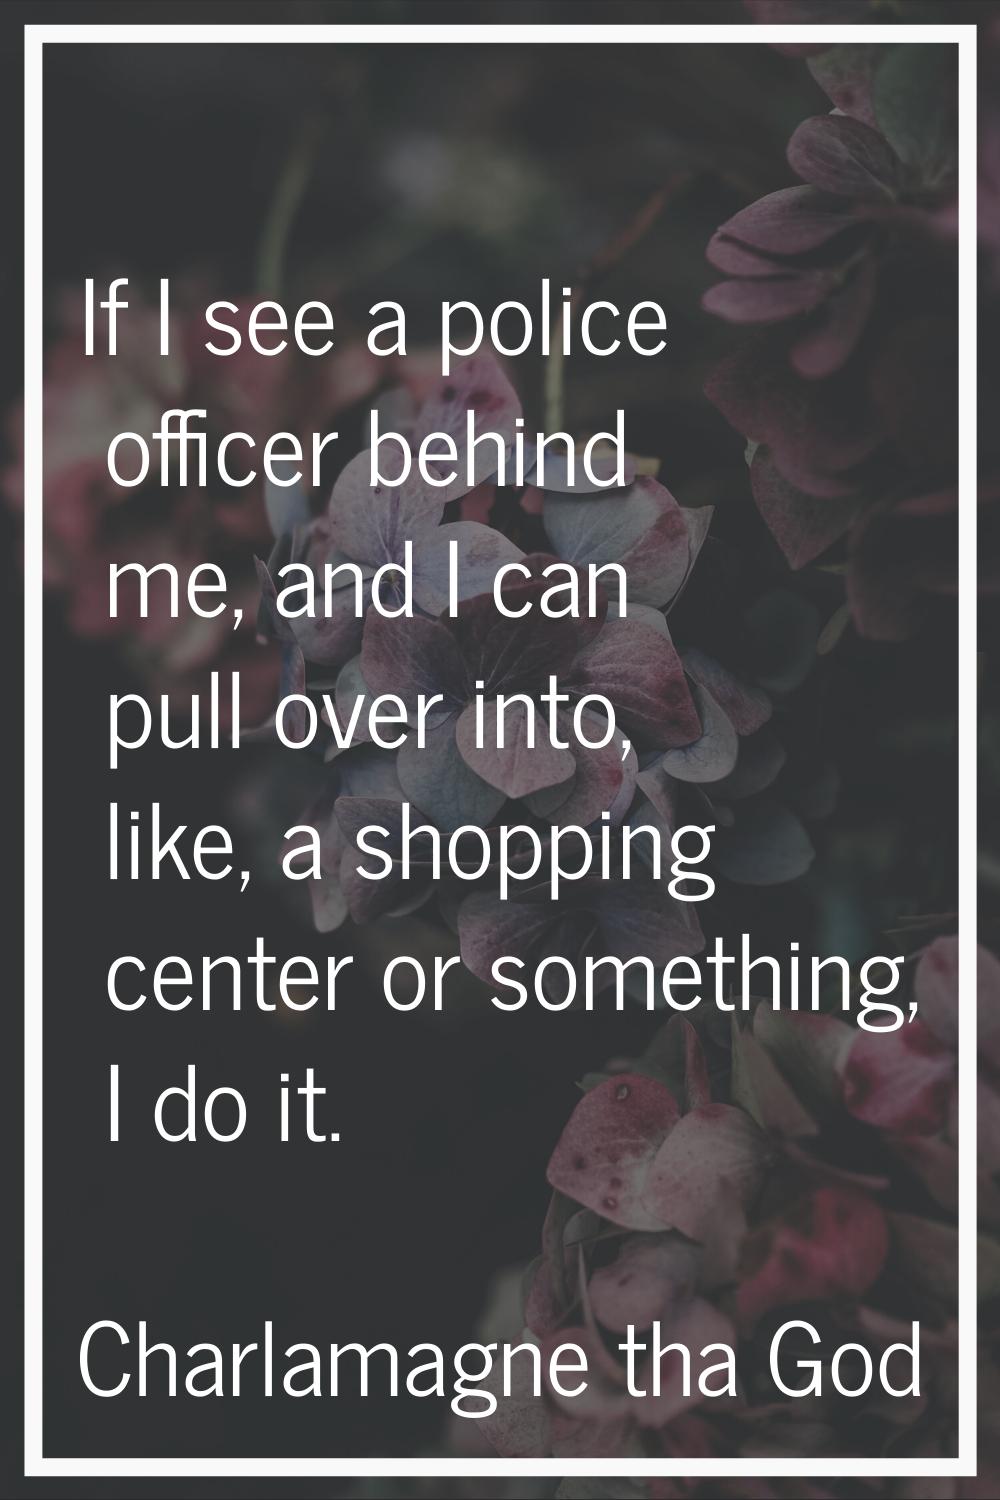 If I see a police officer behind me, and I can pull over into, like, a shopping center or something